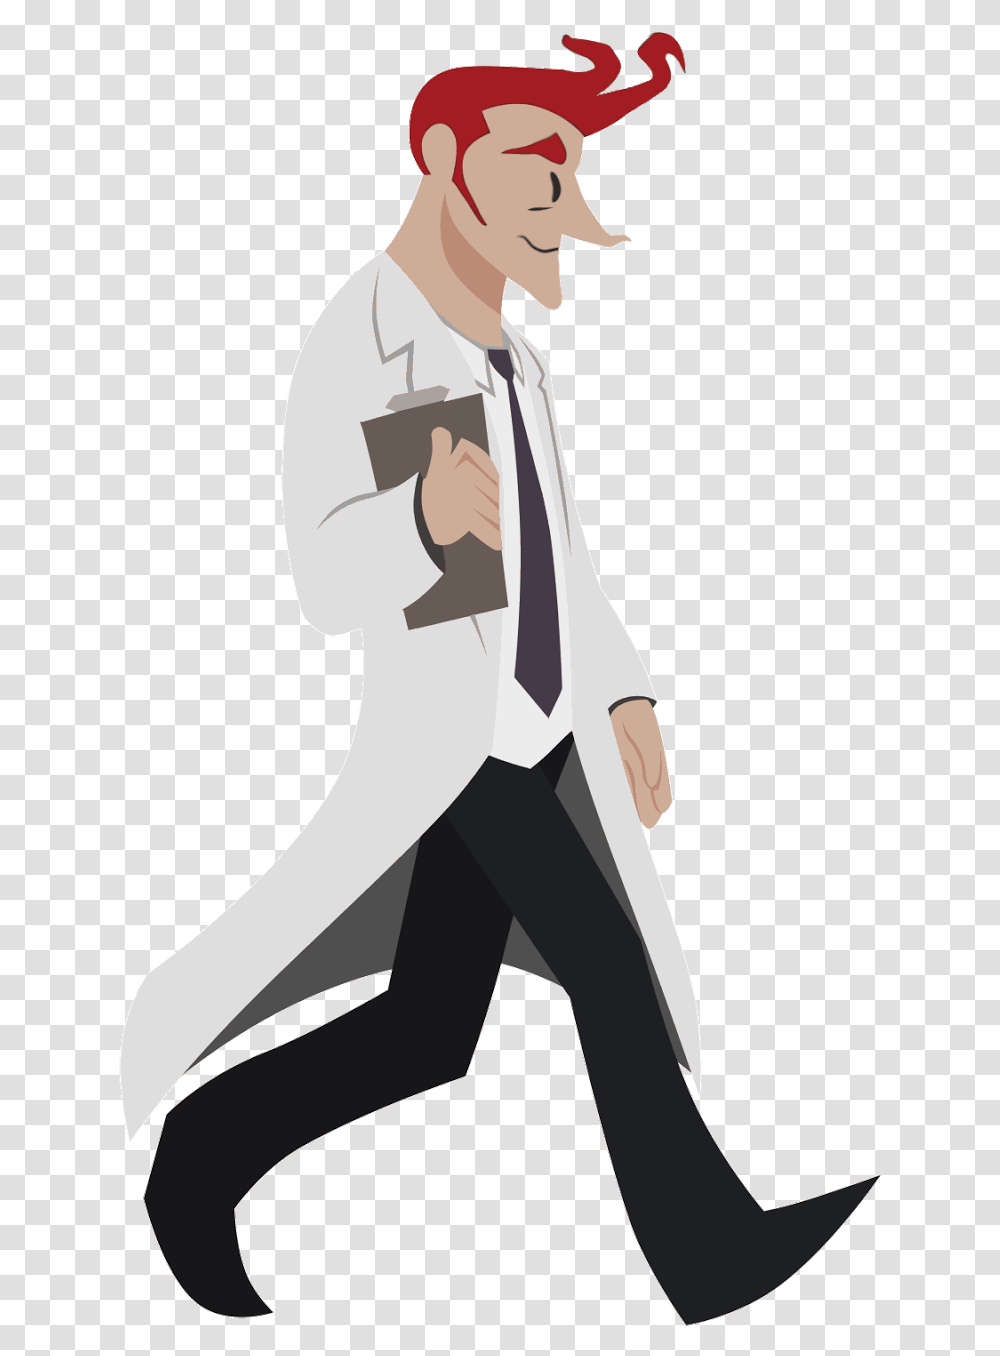 Walk Cycle Animation Scientist Image Gif Animation Walk Animation Gif, Clothing, Suit, Overcoat, Person Transparent Png